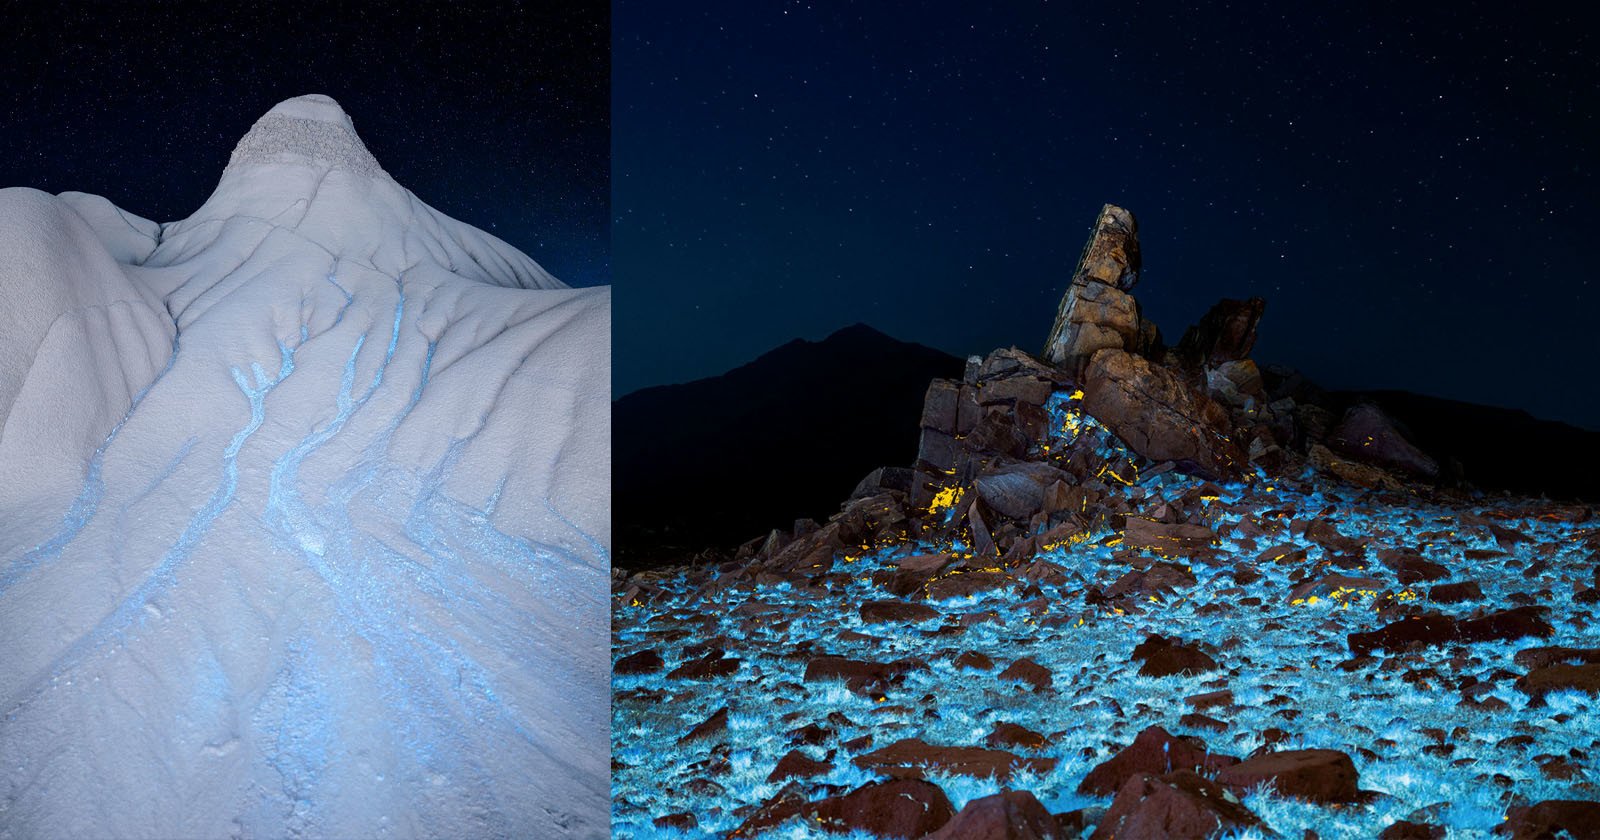 Desert Photos Illuminated by UV Light Look Straight Out Science Fiction